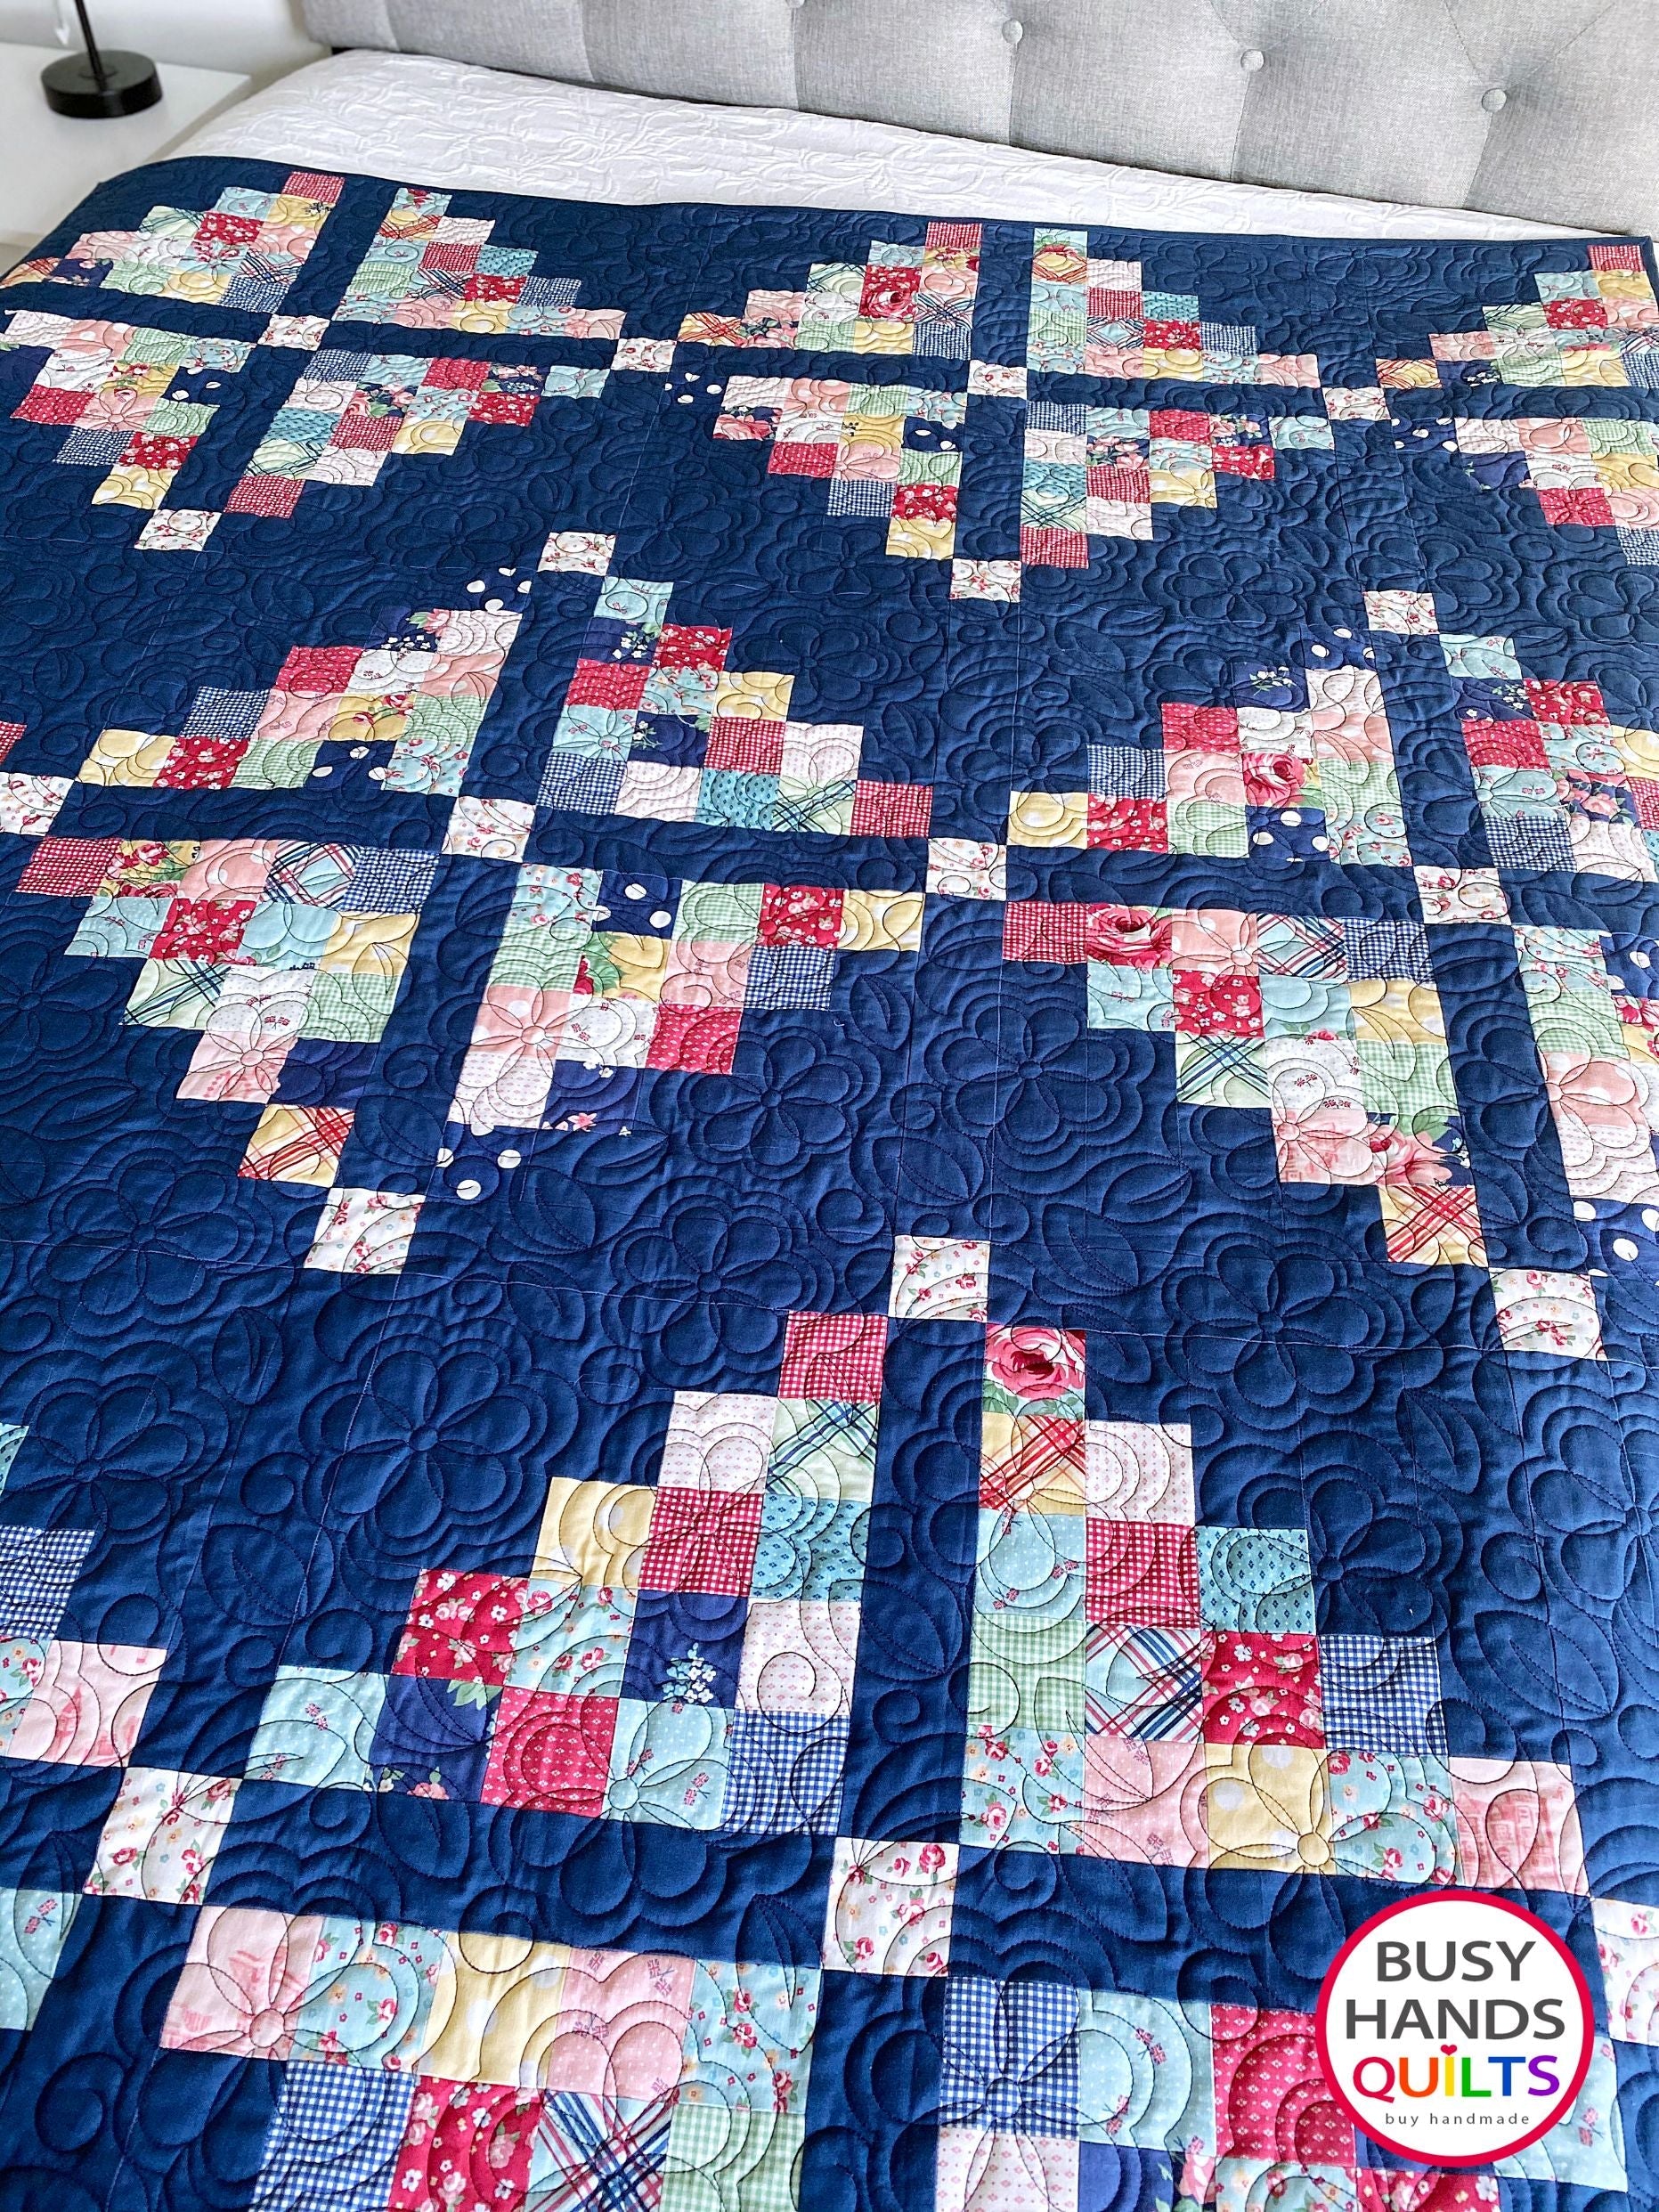 My Farmhouse Quilt Pattern PRINTED Busy Hands Quilts {$price}